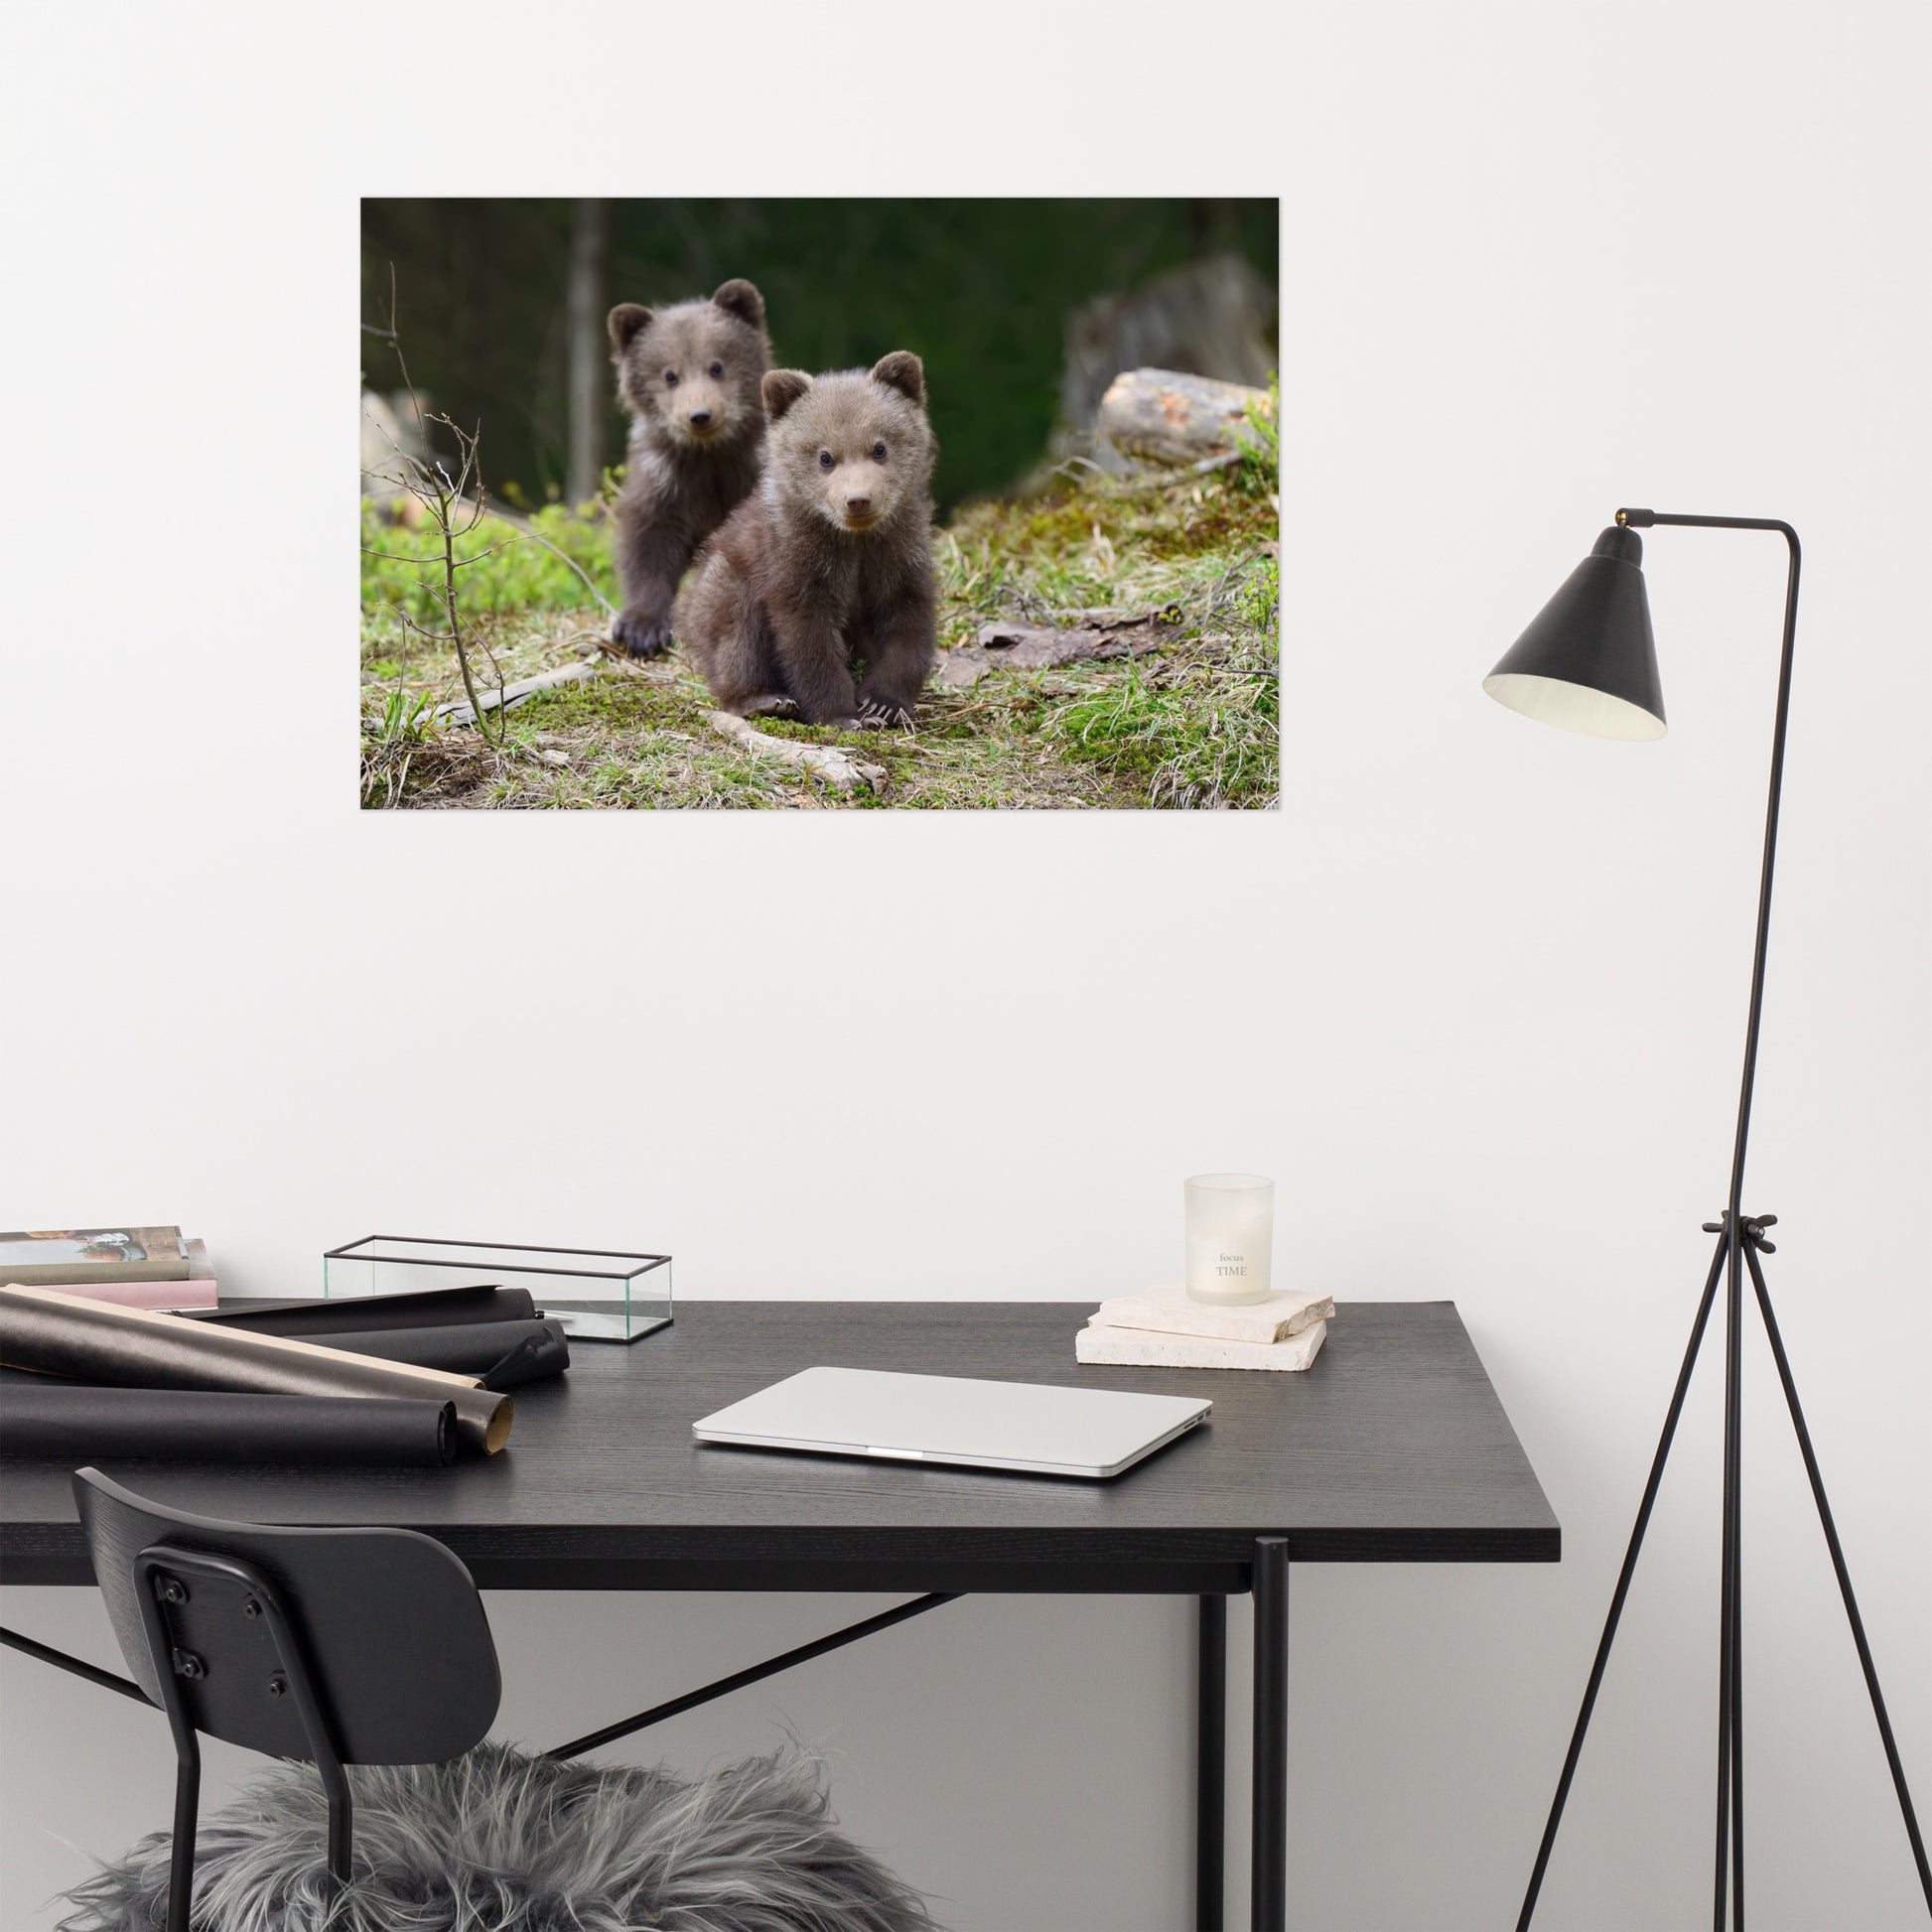 Play Room Wall Art: Adorable Grizzly Bear Cubs In The Trees Animal / Wildlife / Nature Photograph - Loose / Unframed / Frameable / Frameless Wall Art Print / Artwork